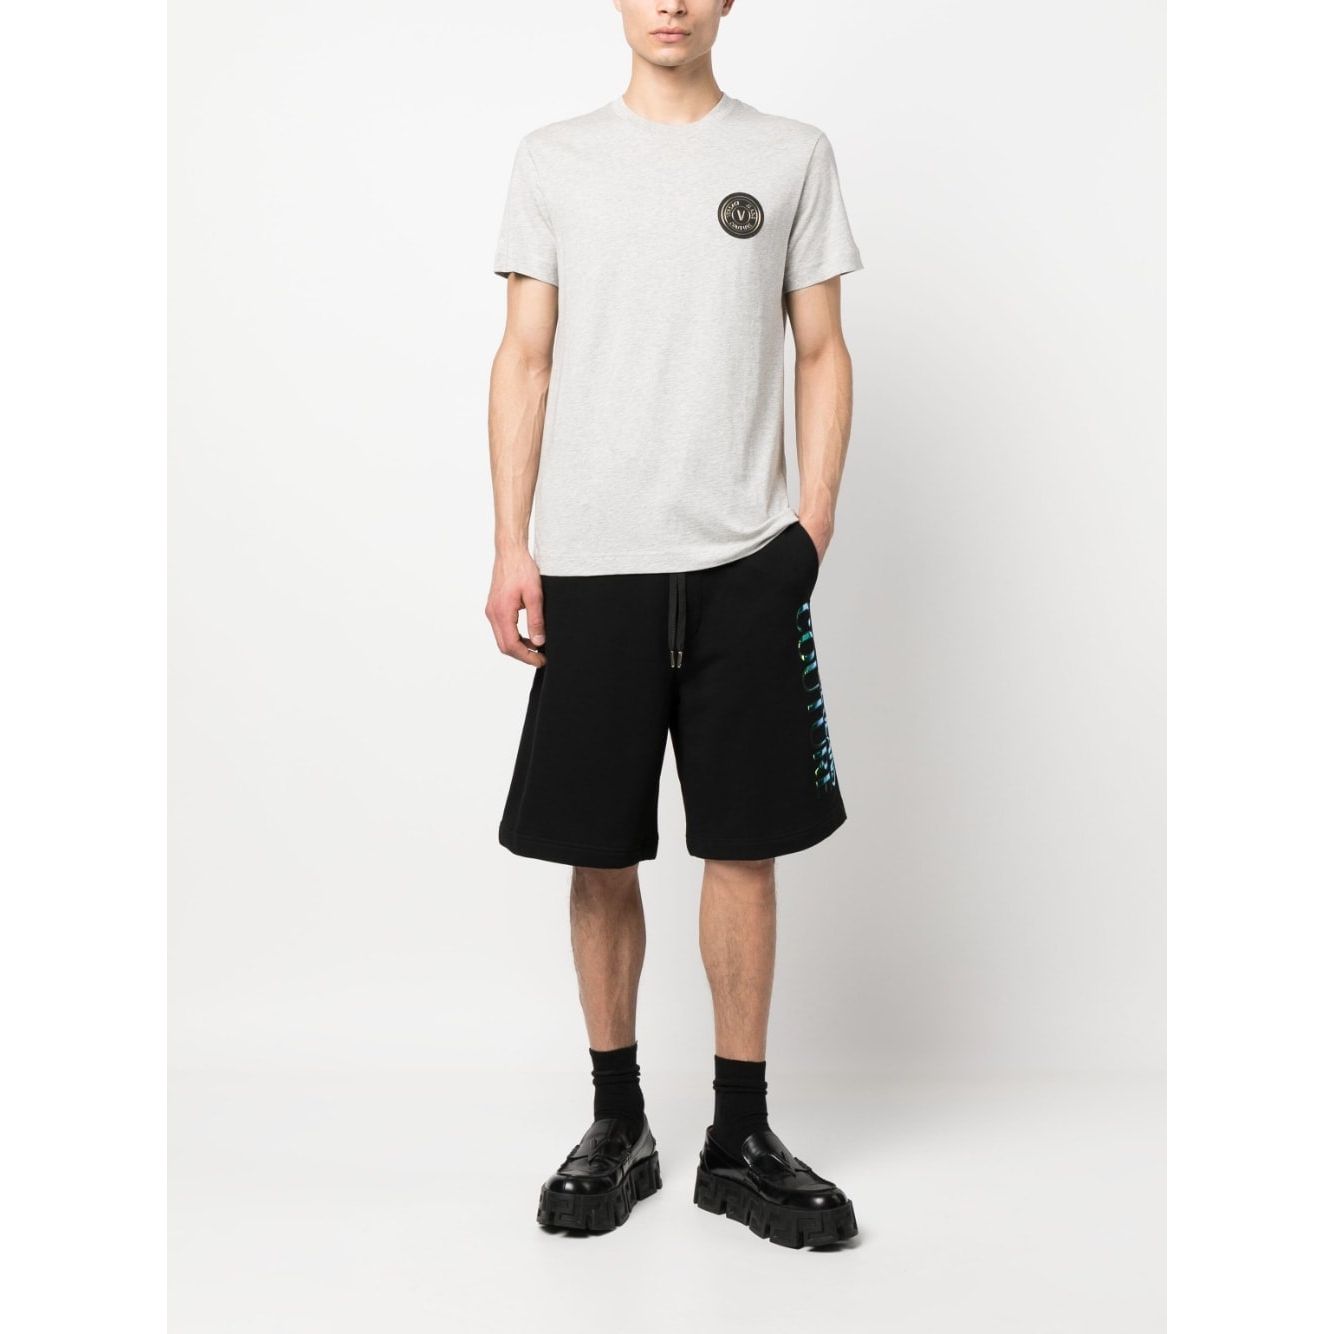 VERSACE JEANS COUTURE "PATCH" COTTON T-SHIRT - Yooto